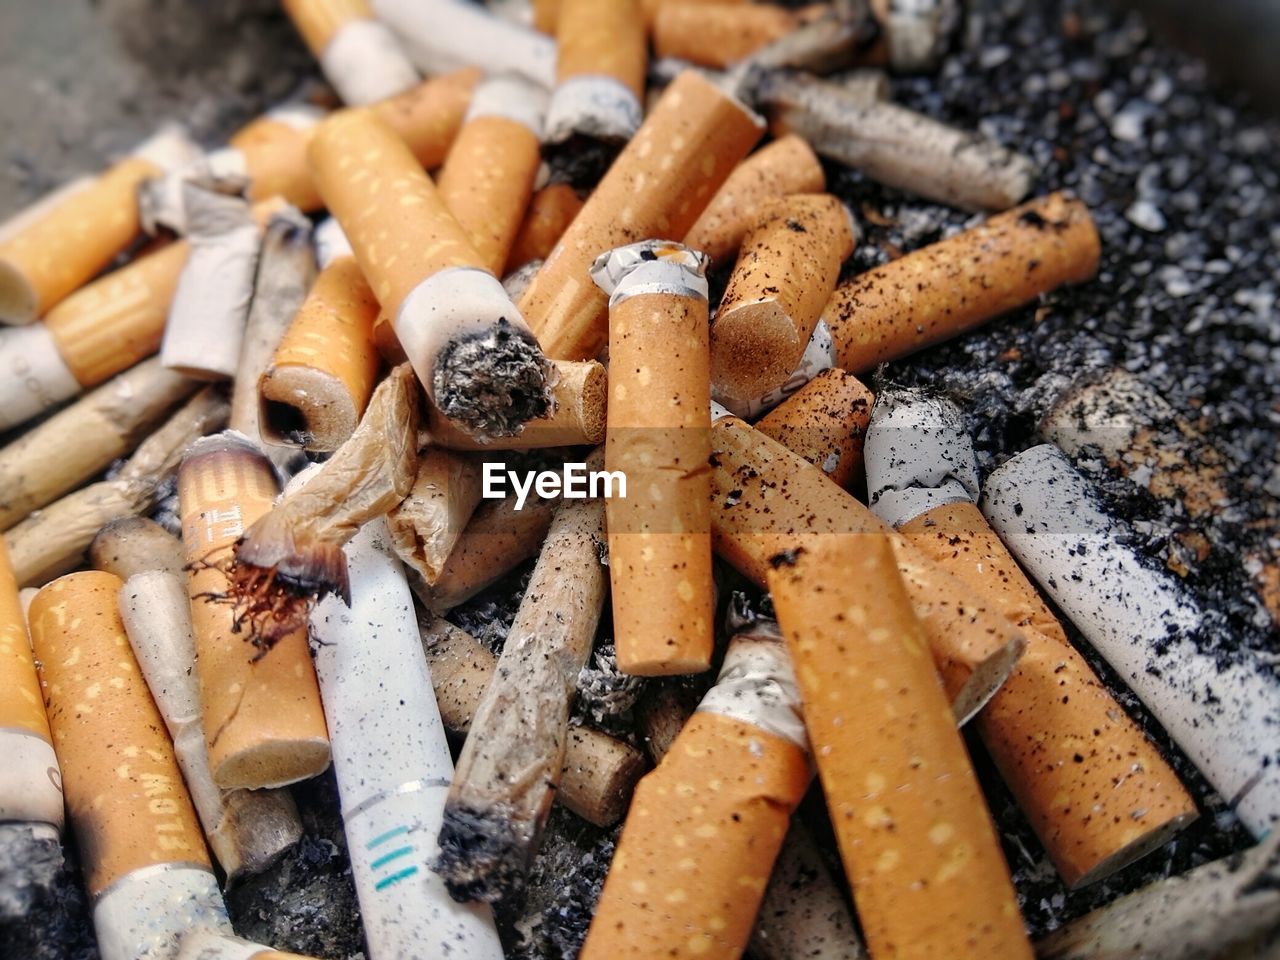 High angle view of cigarette butts